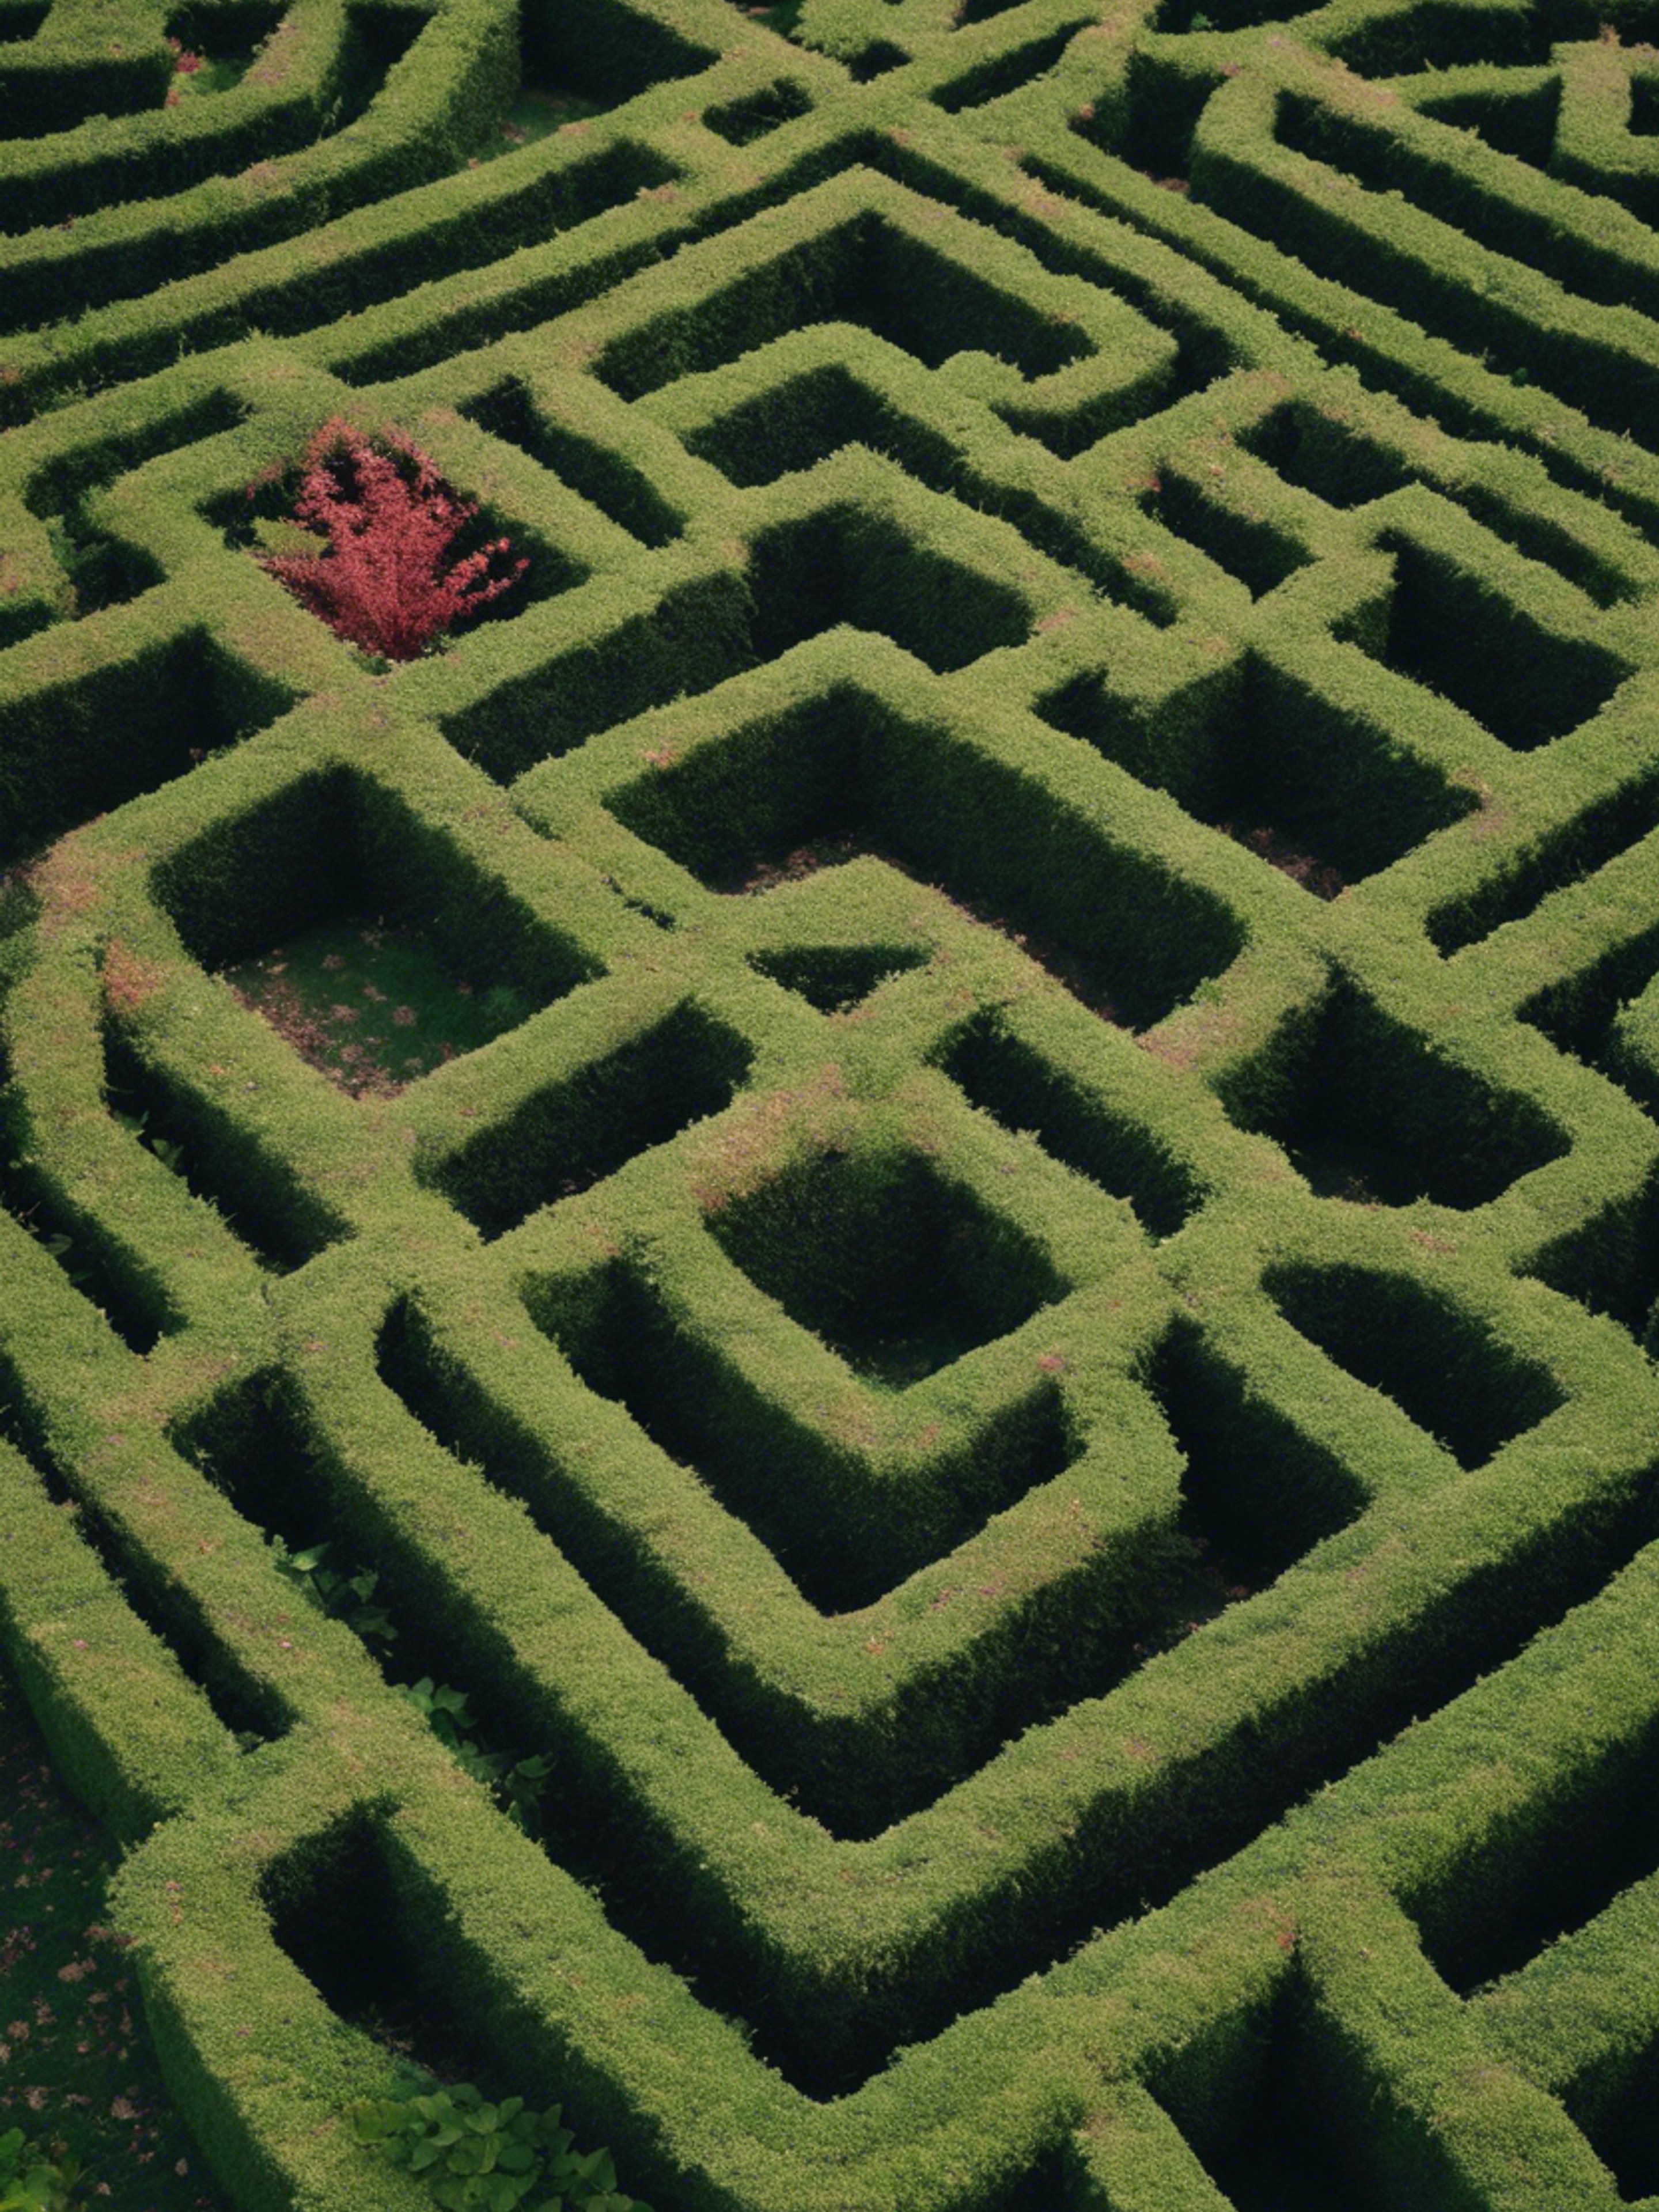 A high angle view of a gothic labyrinth with statuesque hedges of dark green and paths traced in red gravel. Wallpaper[e4e9741e19d140dfbe59]